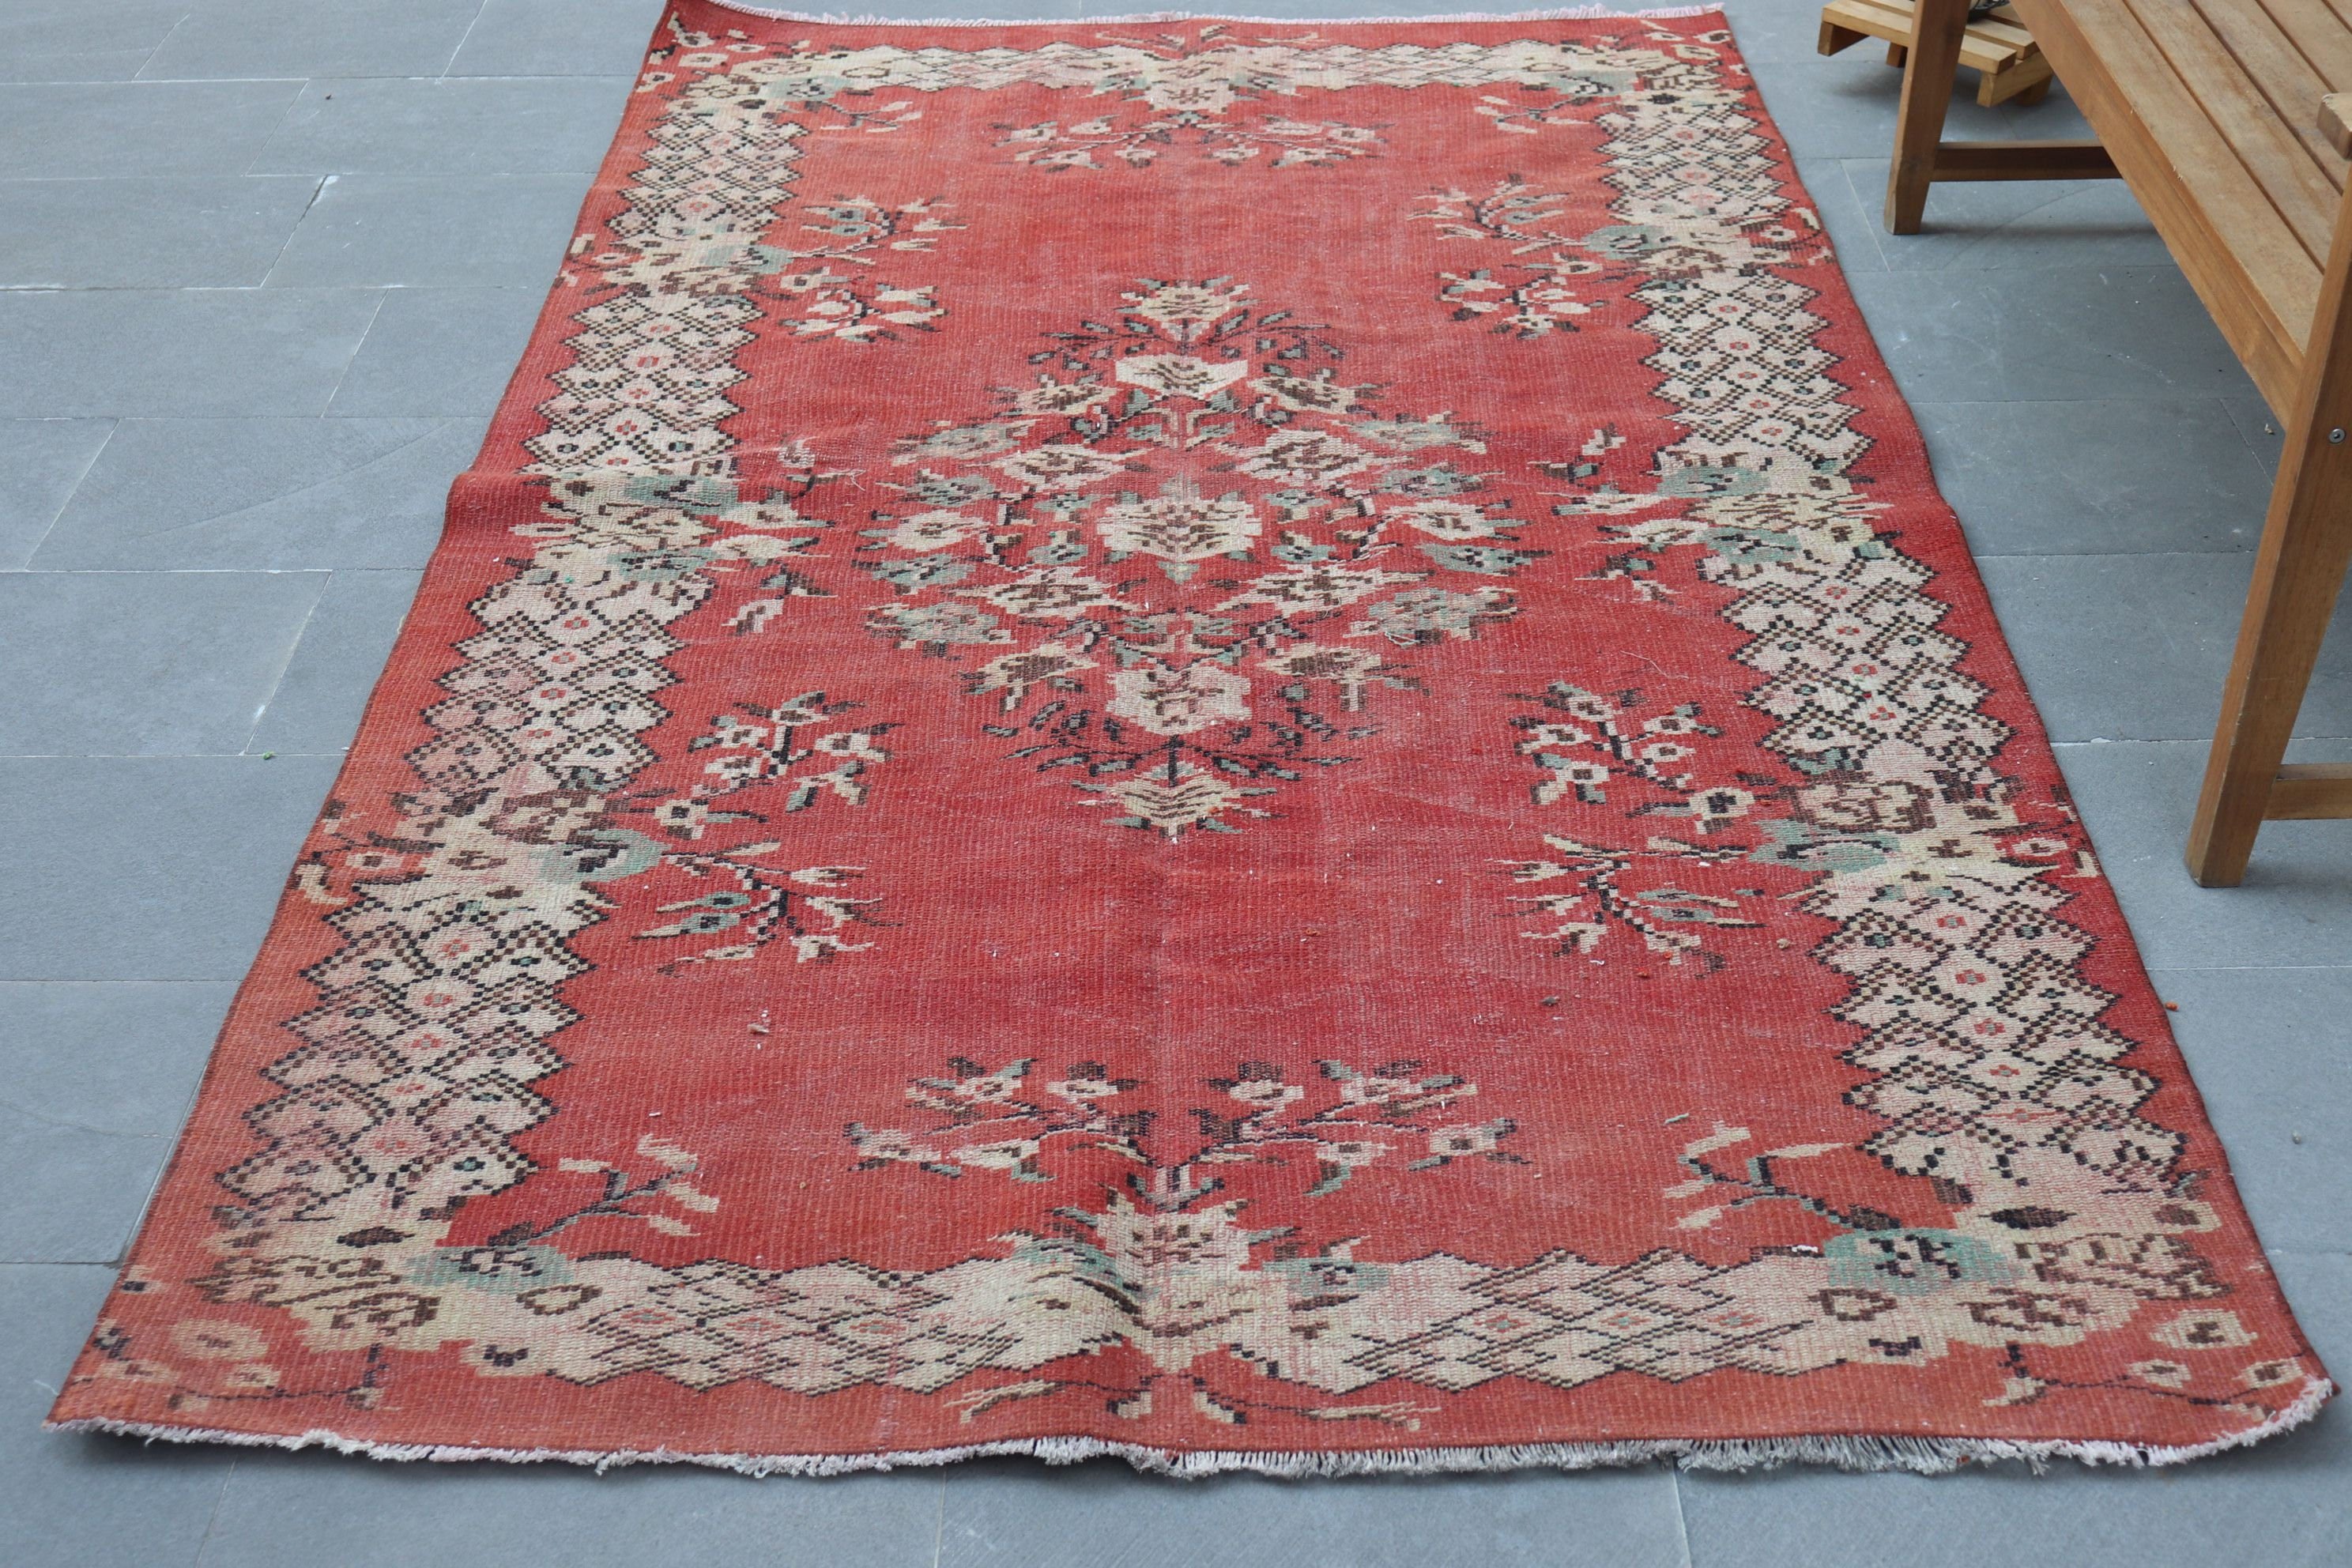 Antique Rugs, Floor Rugs, Rugs for Area, 4.7x7.9 ft Area Rugs, Red Anatolian Rugs, Turkish Rug, Vintage Rugs, Dining Room Rugs, Retro Rug